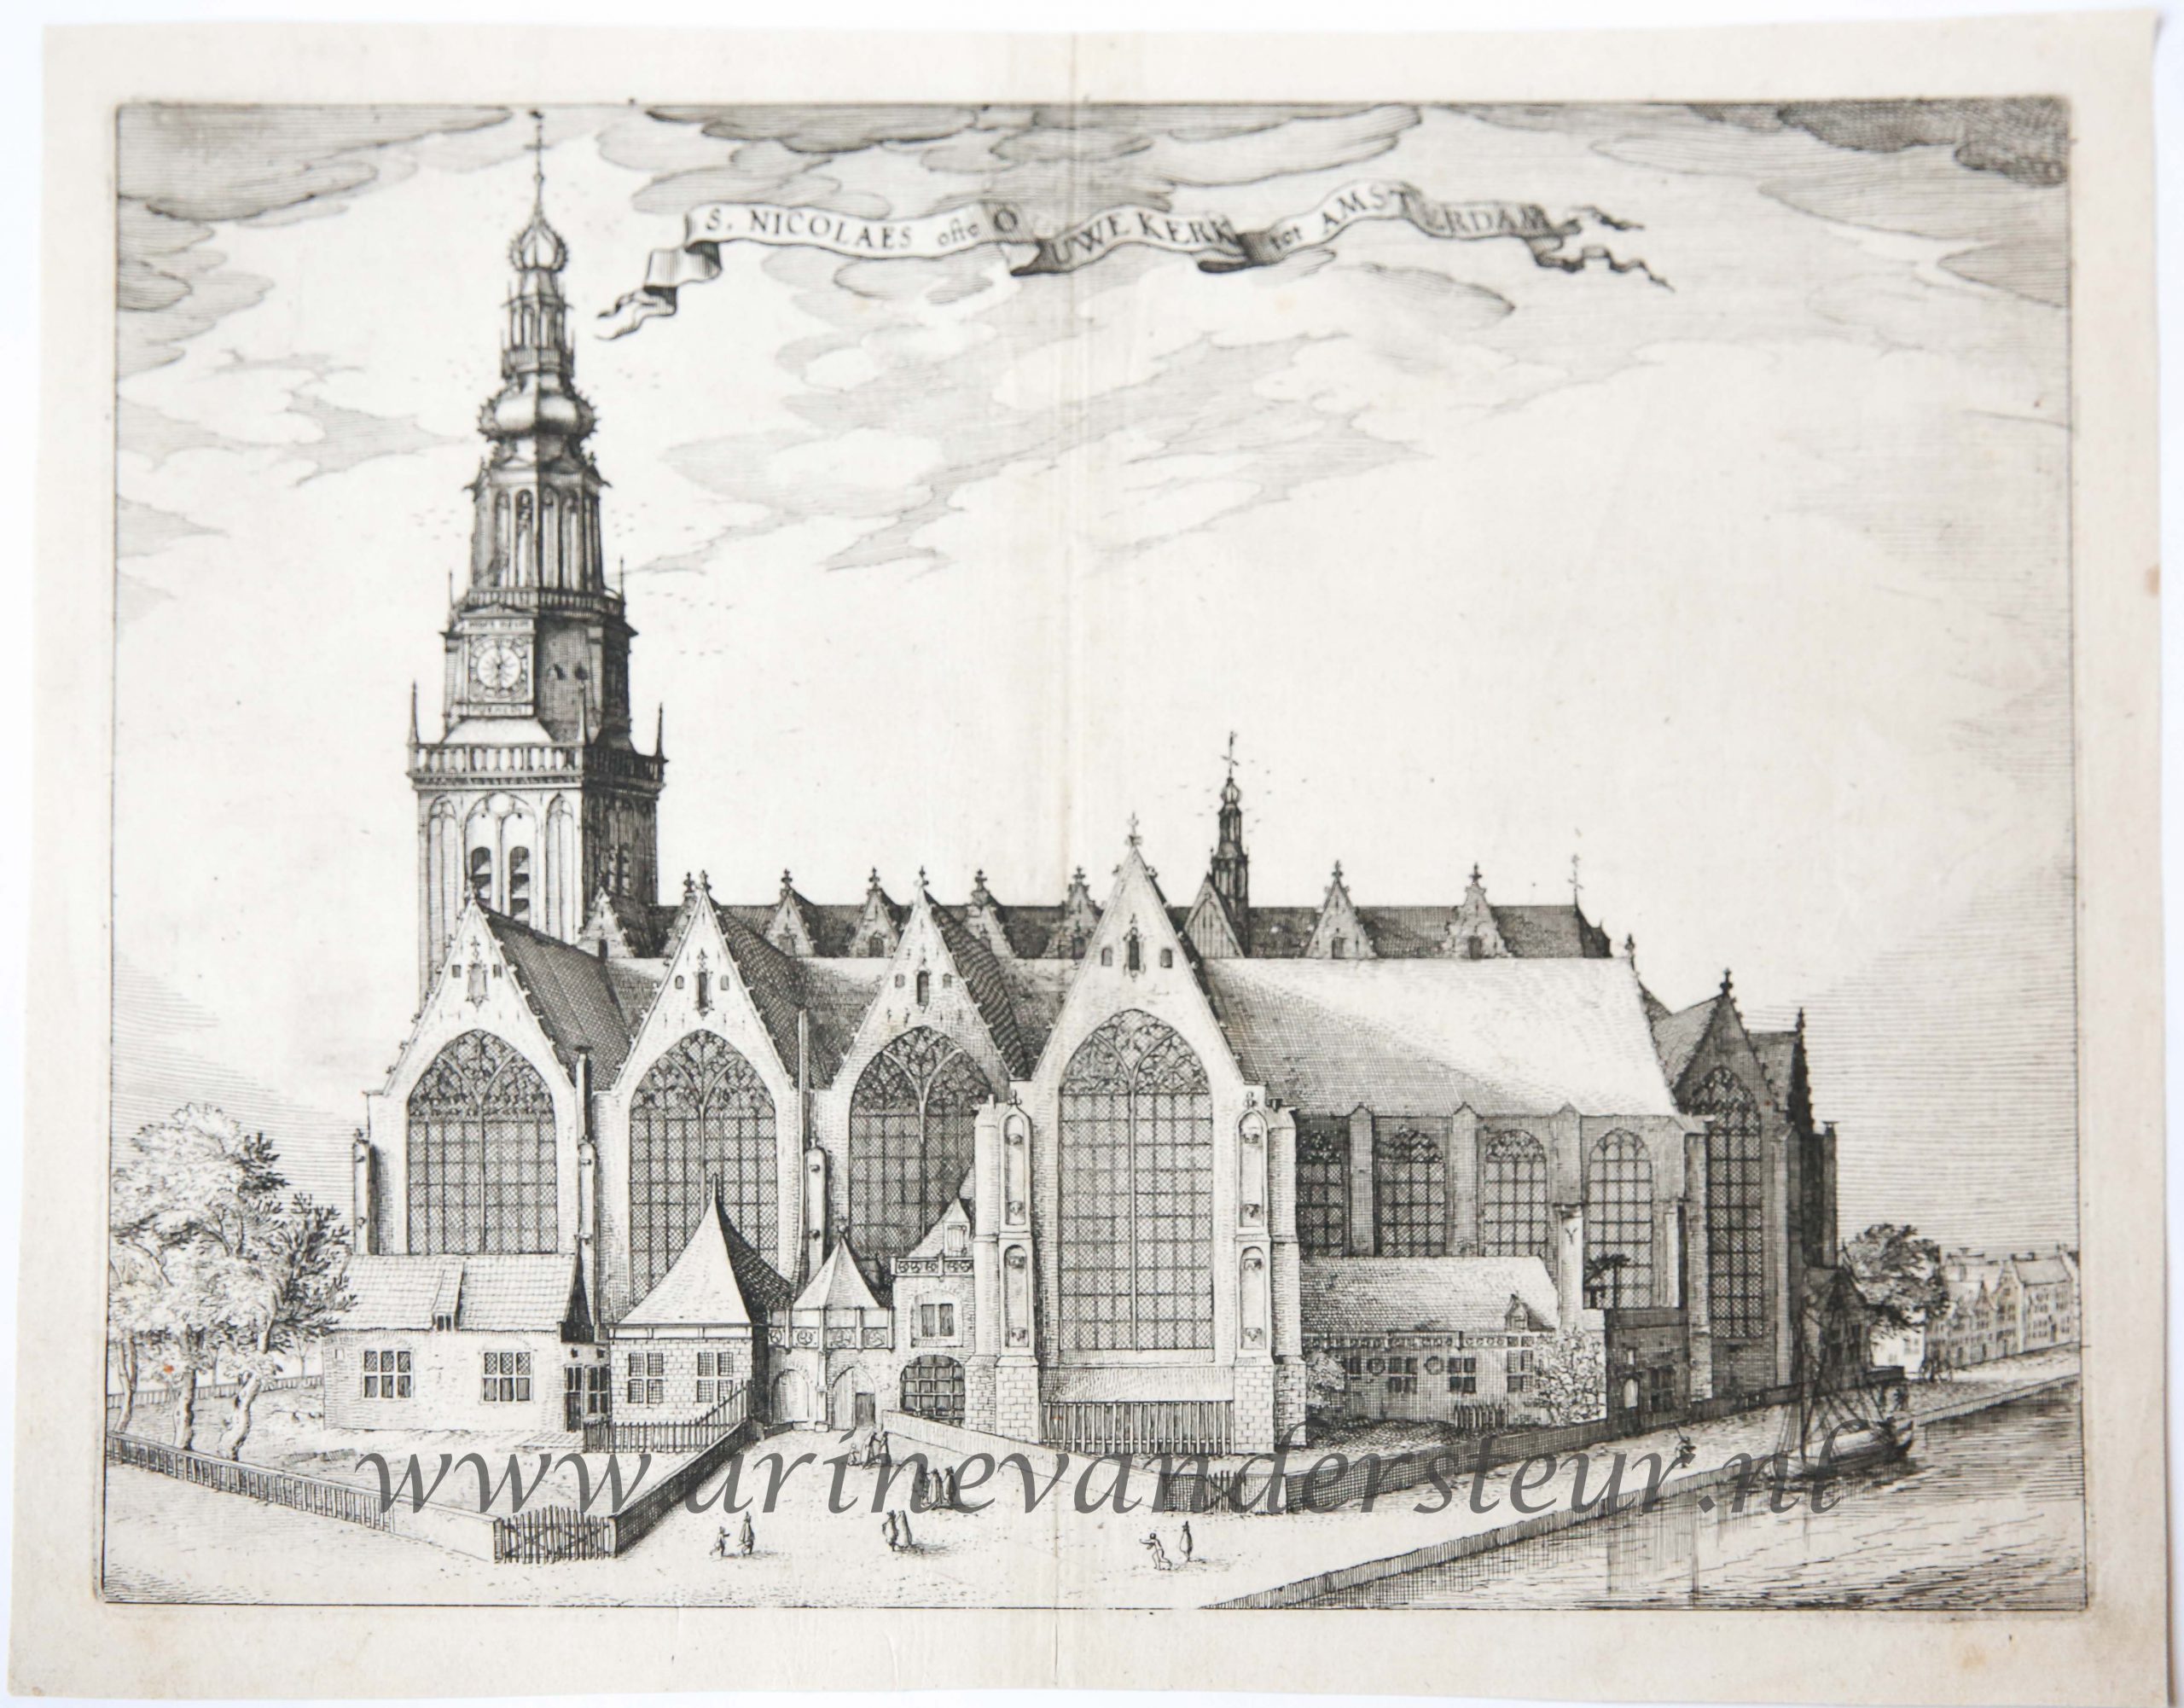 [Antique print, etching] The Old Church in Amsterdam/De Oude Kerk in Amsterdam toegewijd aan St. Nicolaas, published 1612/1648.